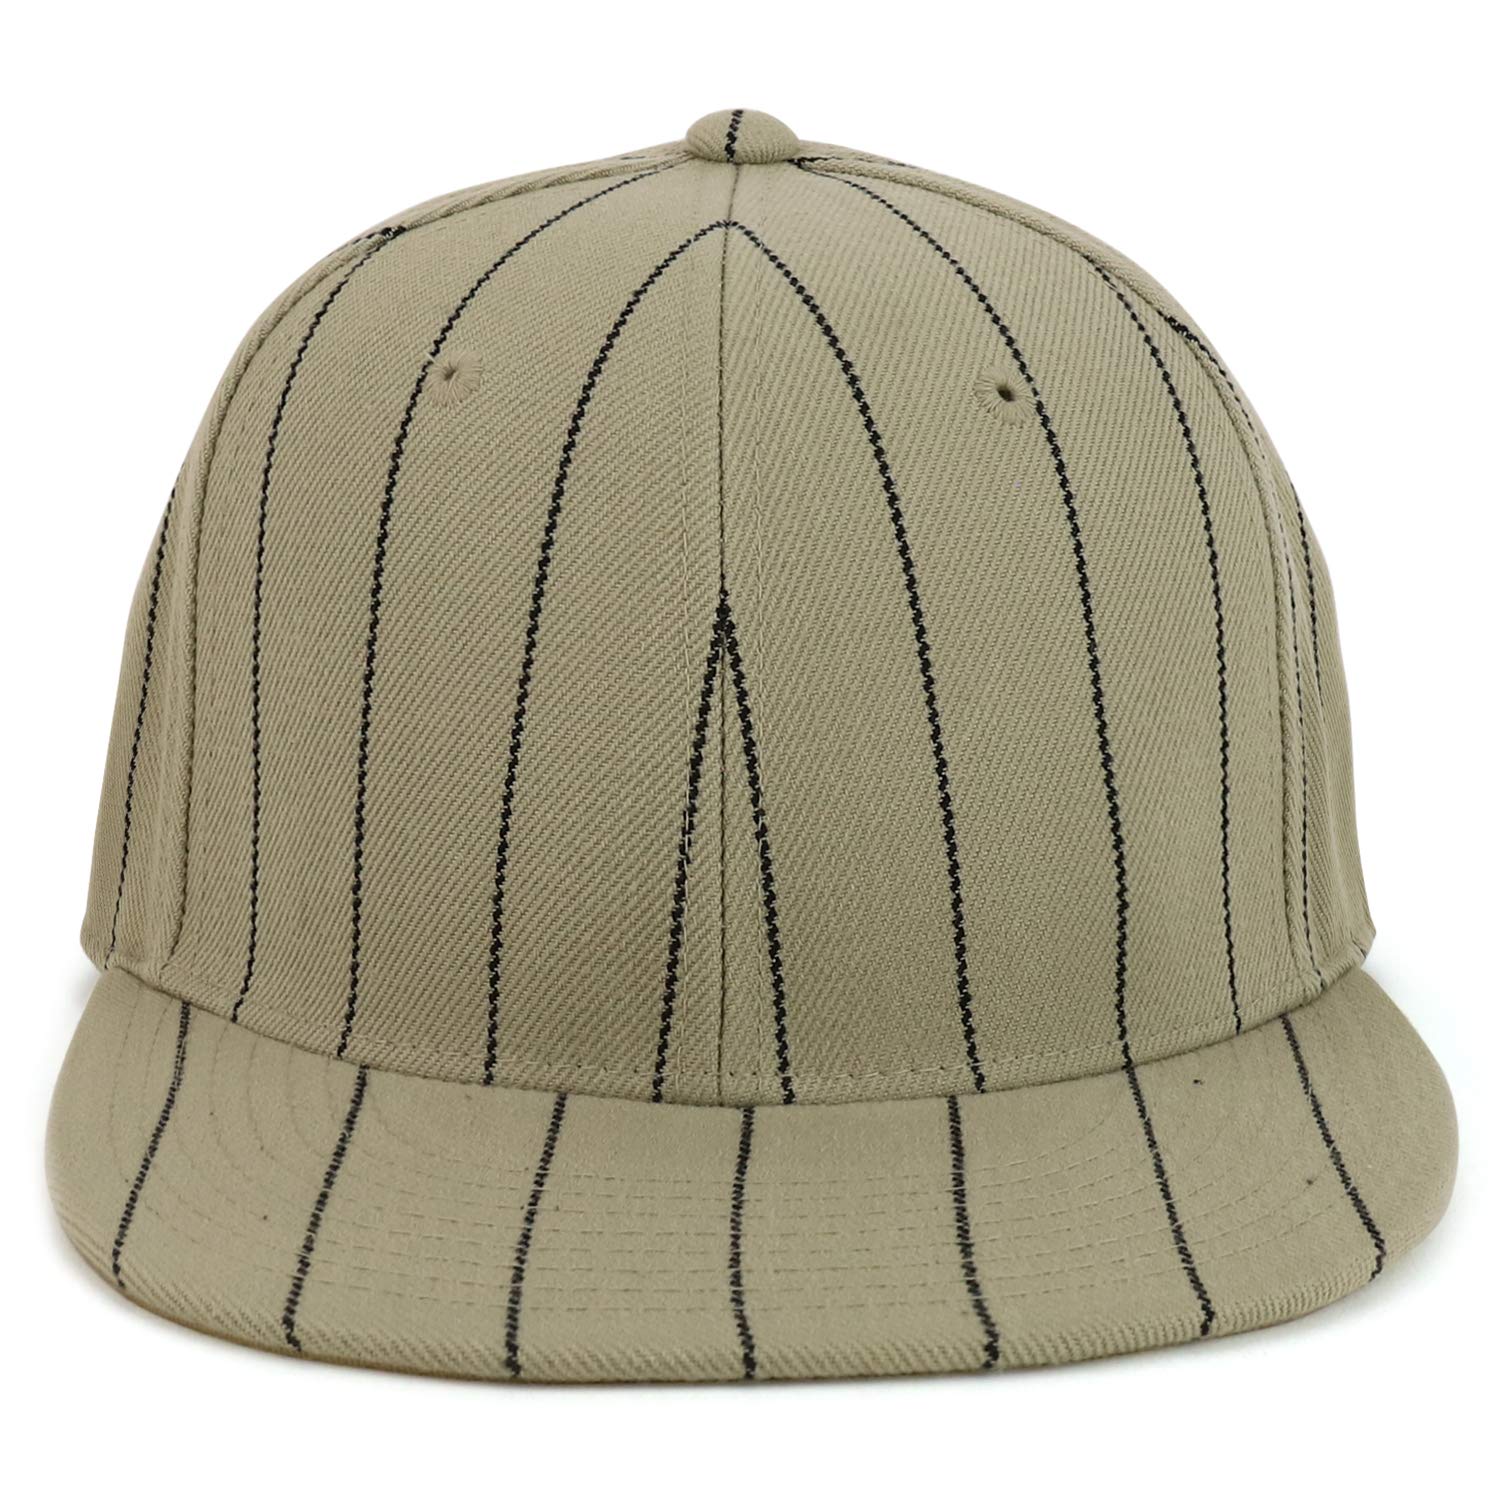 Armycrew Pin Striped Structured Flatbill Fitted Baseball Cap - Khaki - 7 1/4